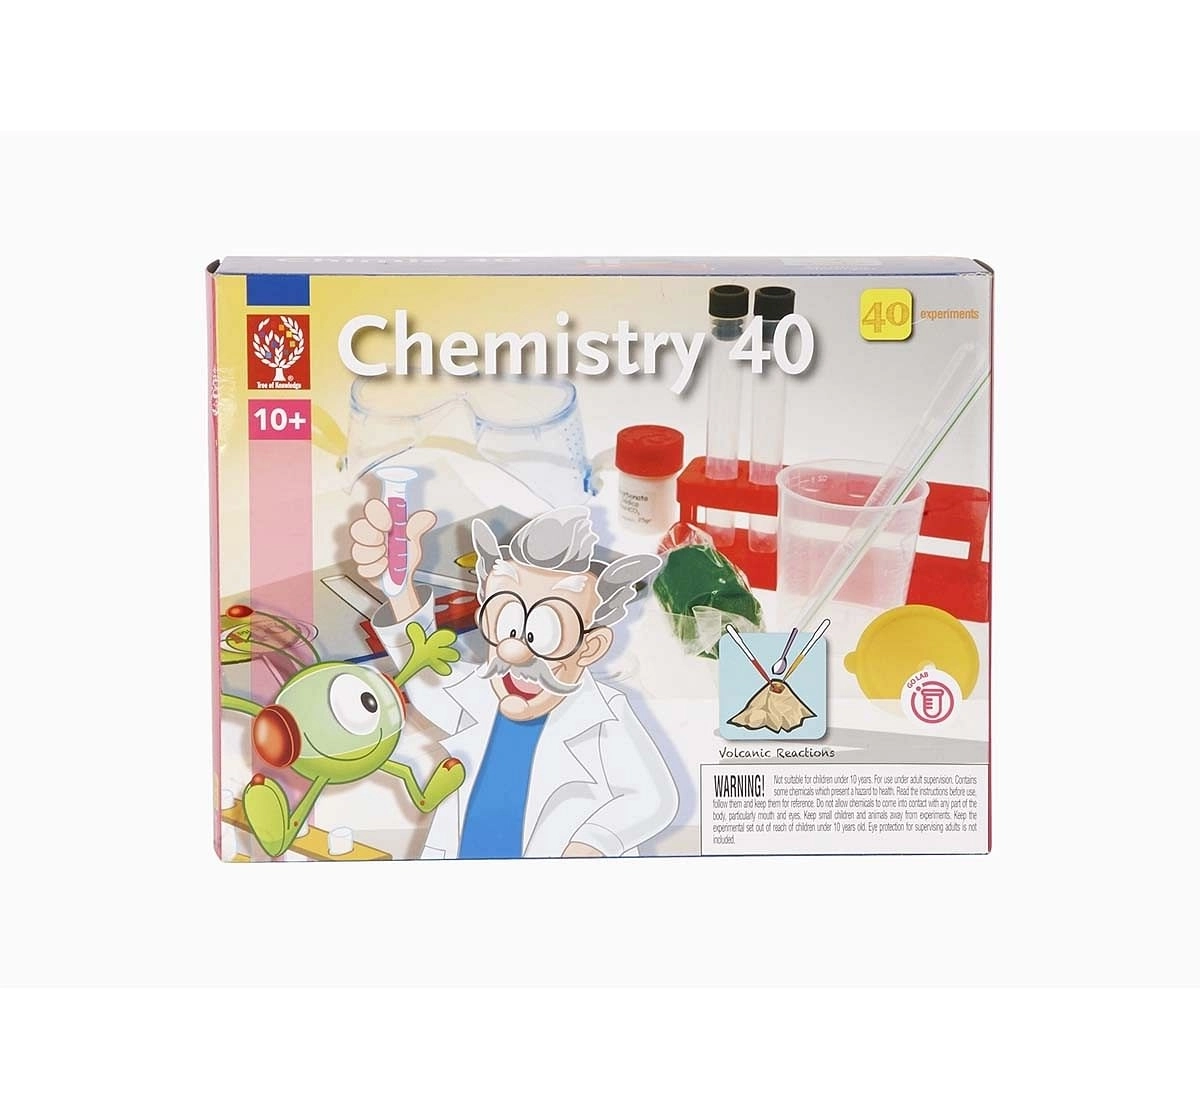 Eduscience Tree Of Knowledge Chemistry Kit- 40 Experiments Science Kits for Kids age 10Y+ 